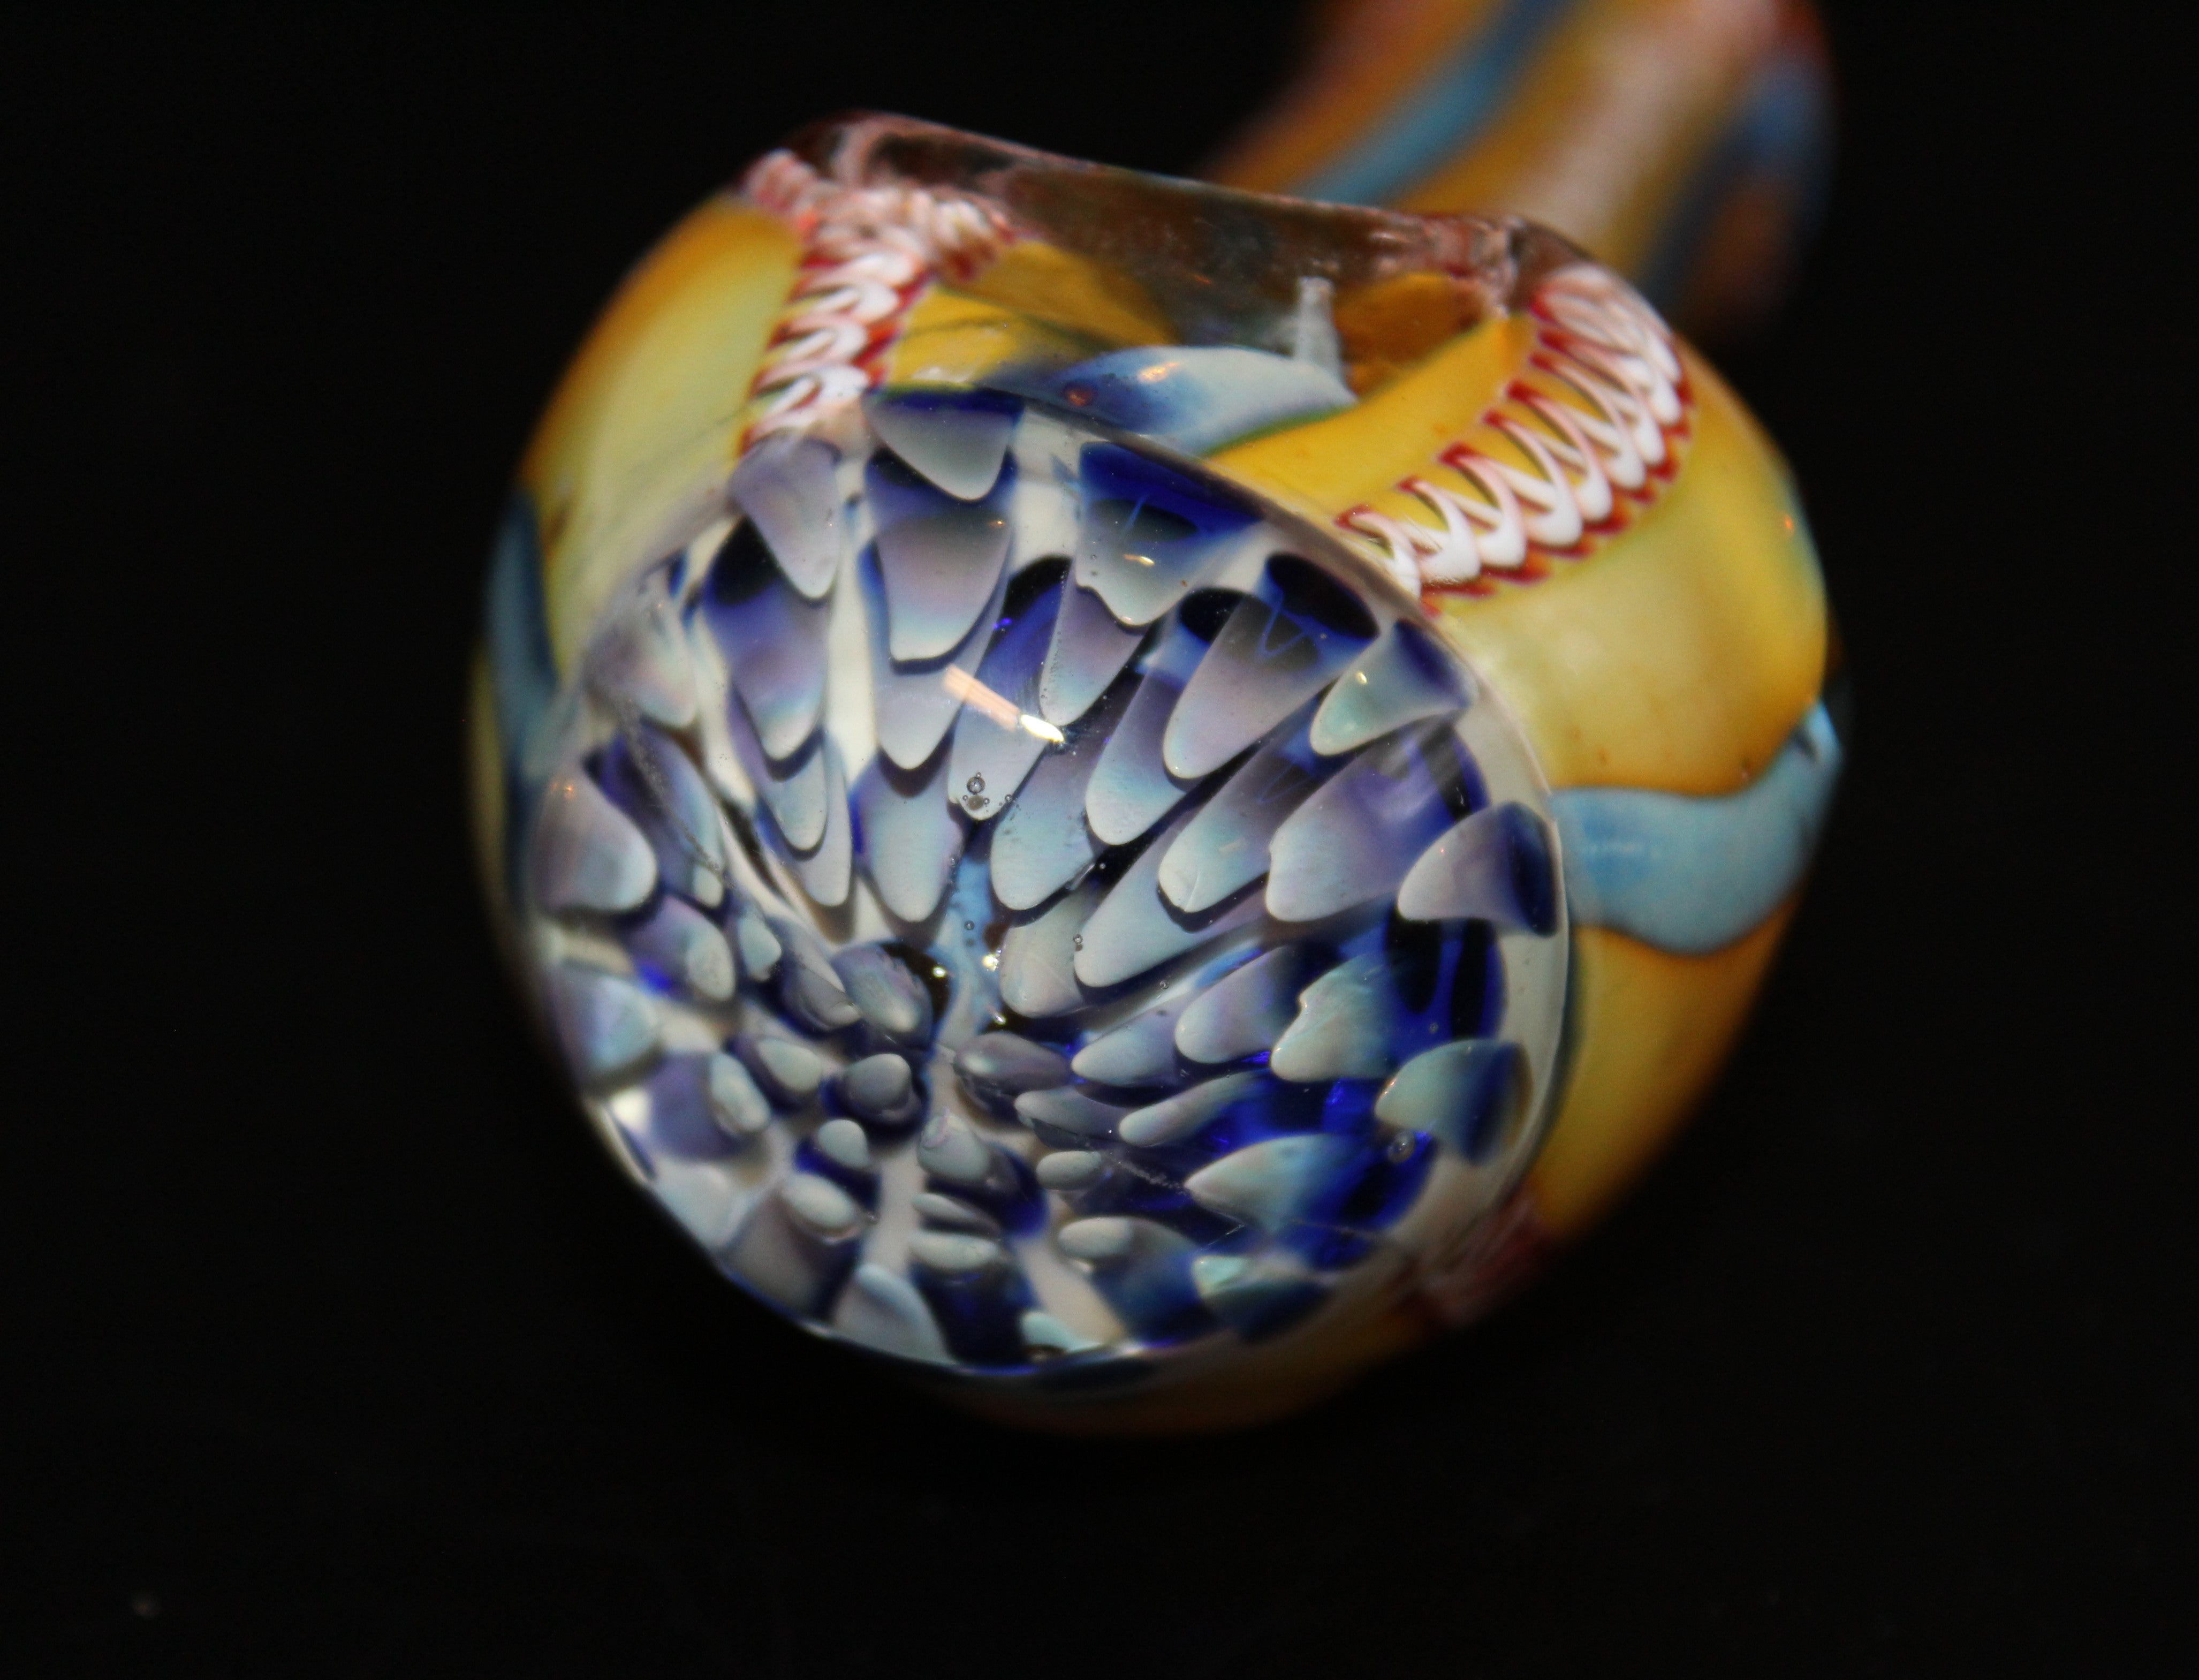 4 1/2" SHARK TOOTH Glass Pipe